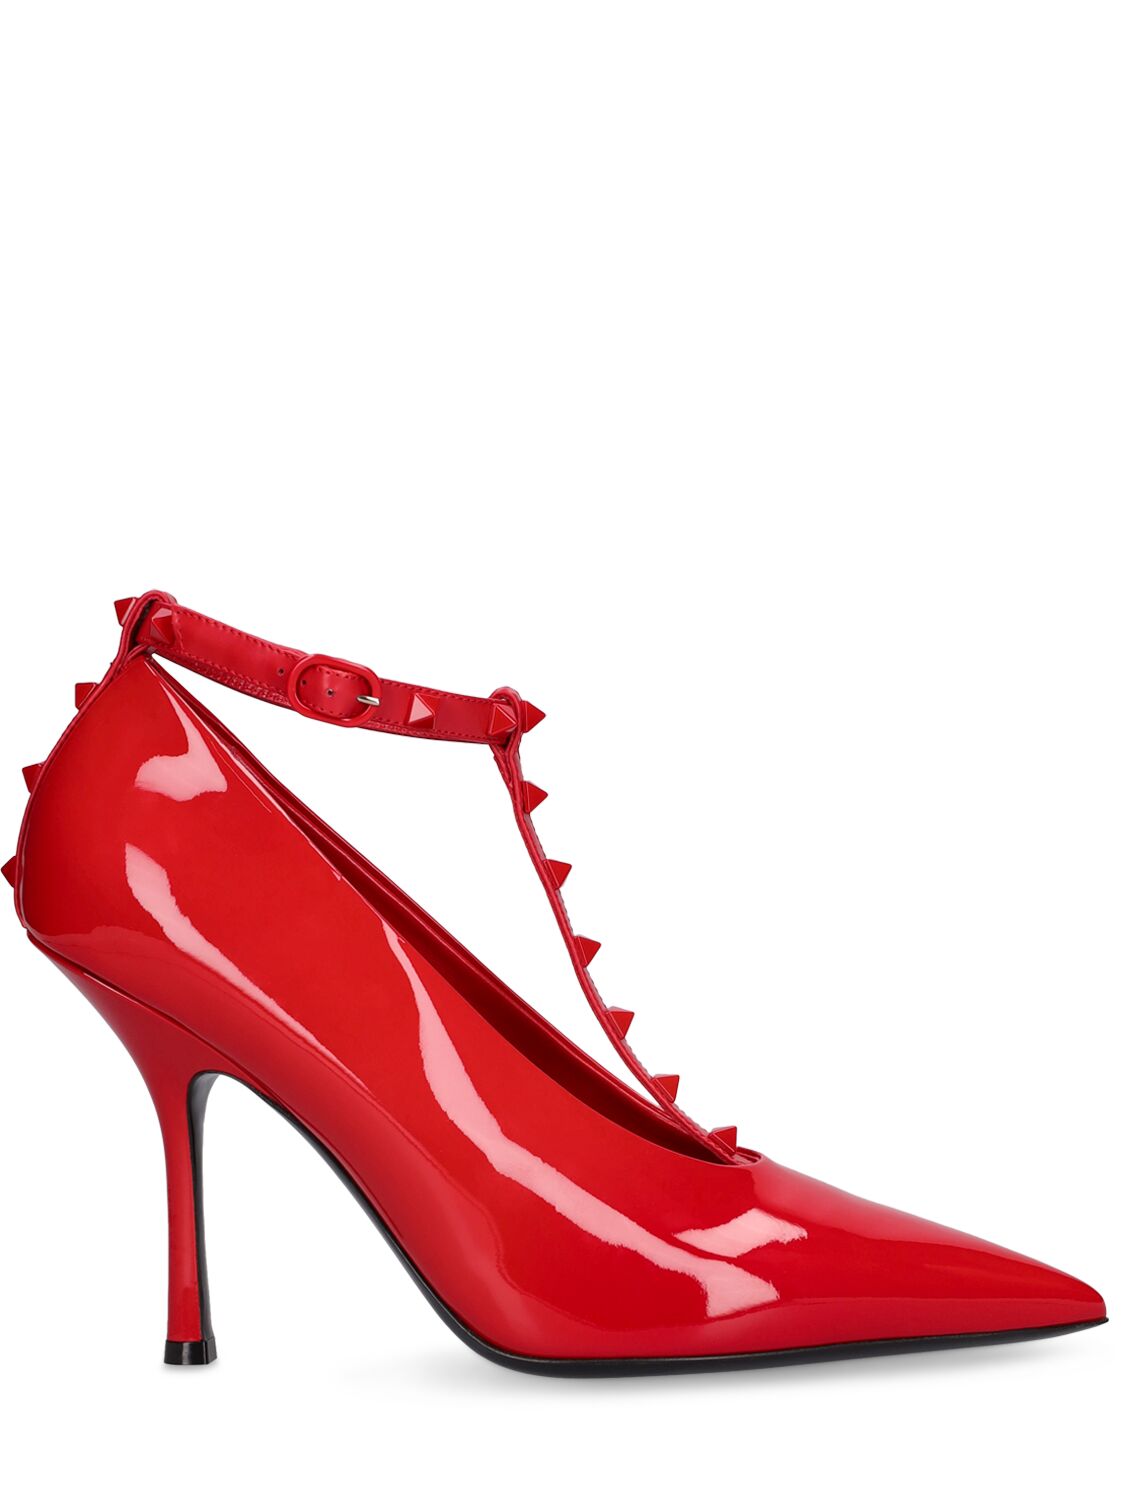 Valentino Garavani Women's Rockstud Patent Leather Pumps With Matching Studs 100mm In Red